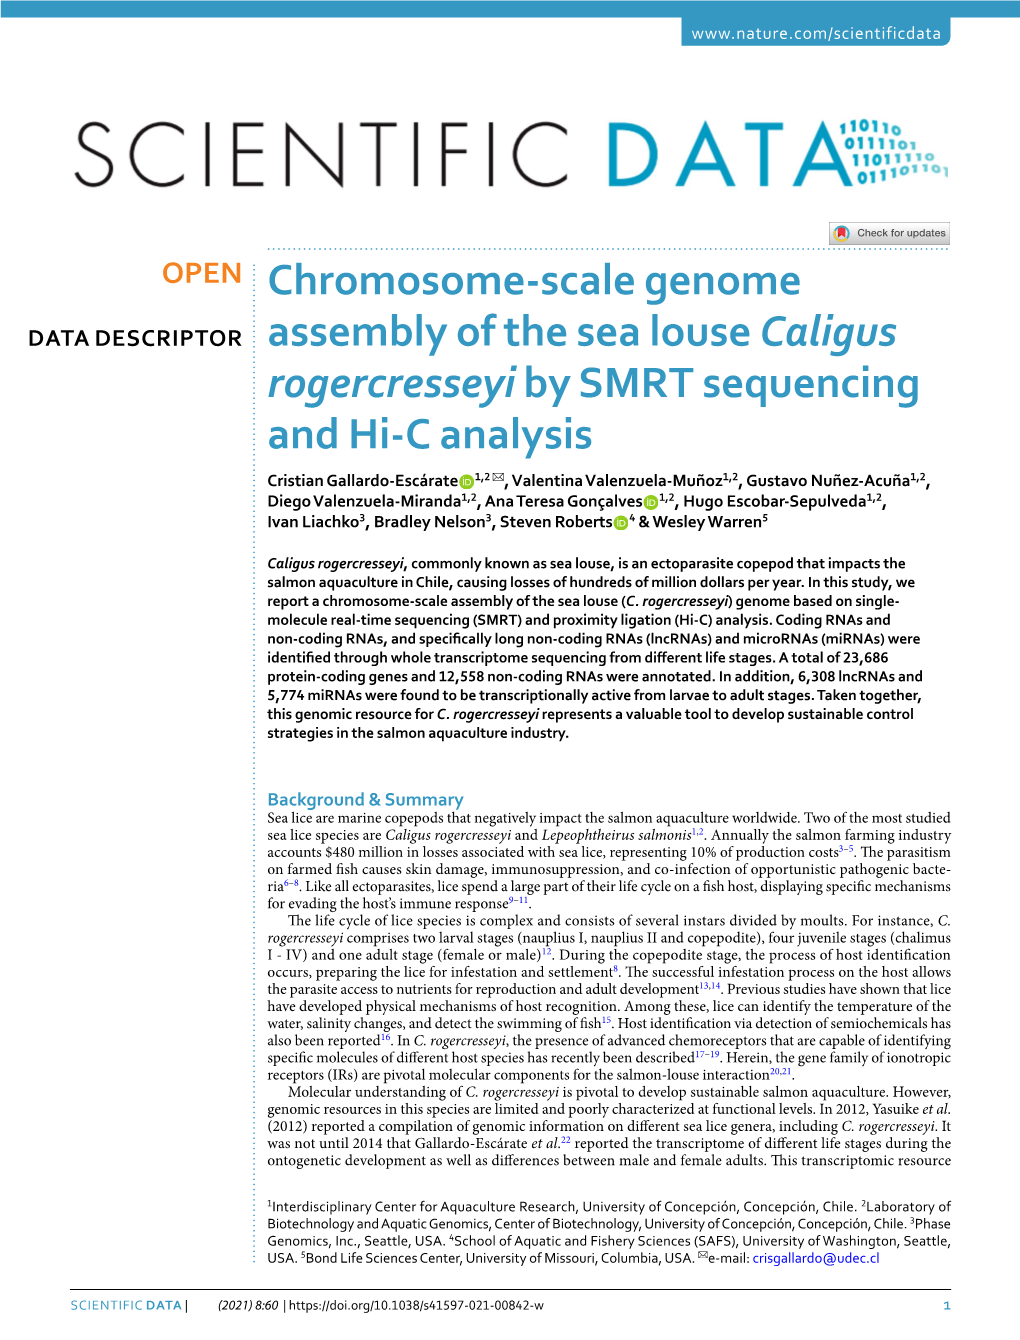 Chromosome-Scale Genome Assembly of the Sea Louse Caligus